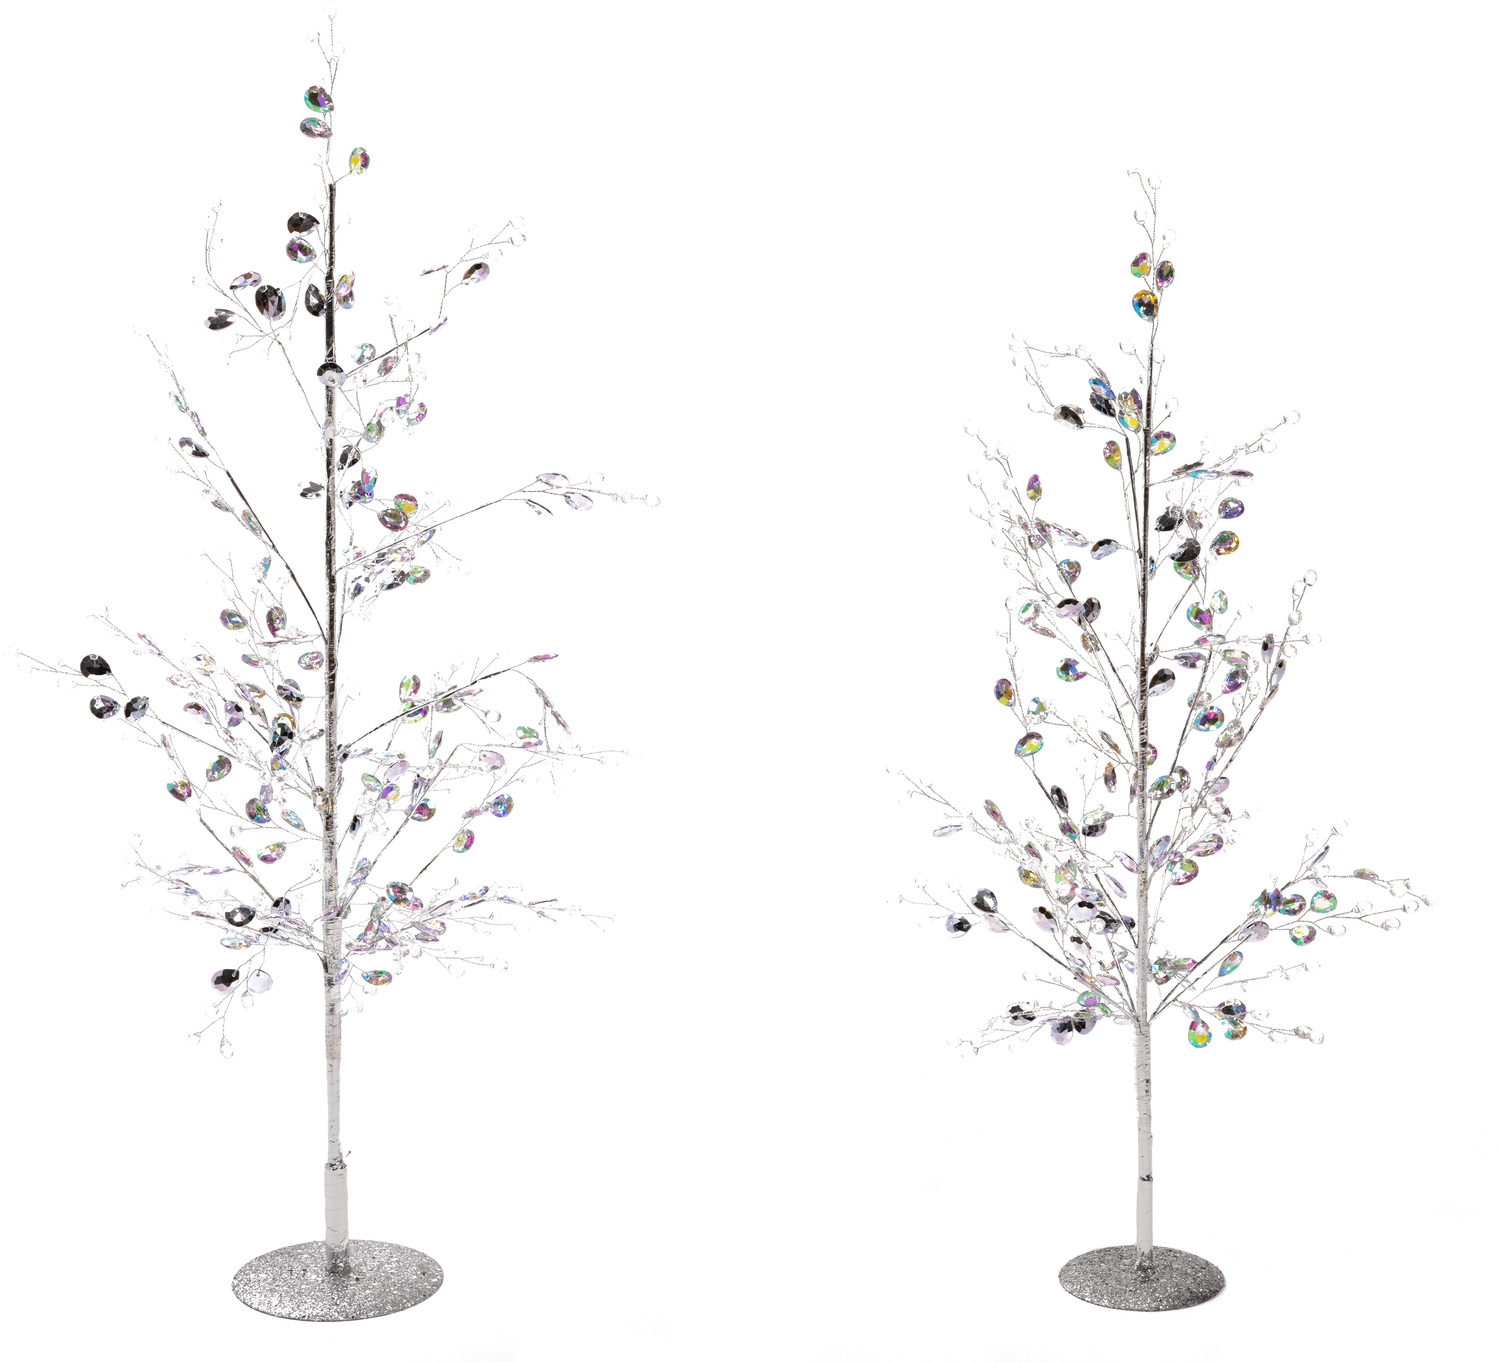 Iridescent by Holiday Hoopla - Iridescent - 25" & 22" Decorative Gemmed Trees (Set of 2)